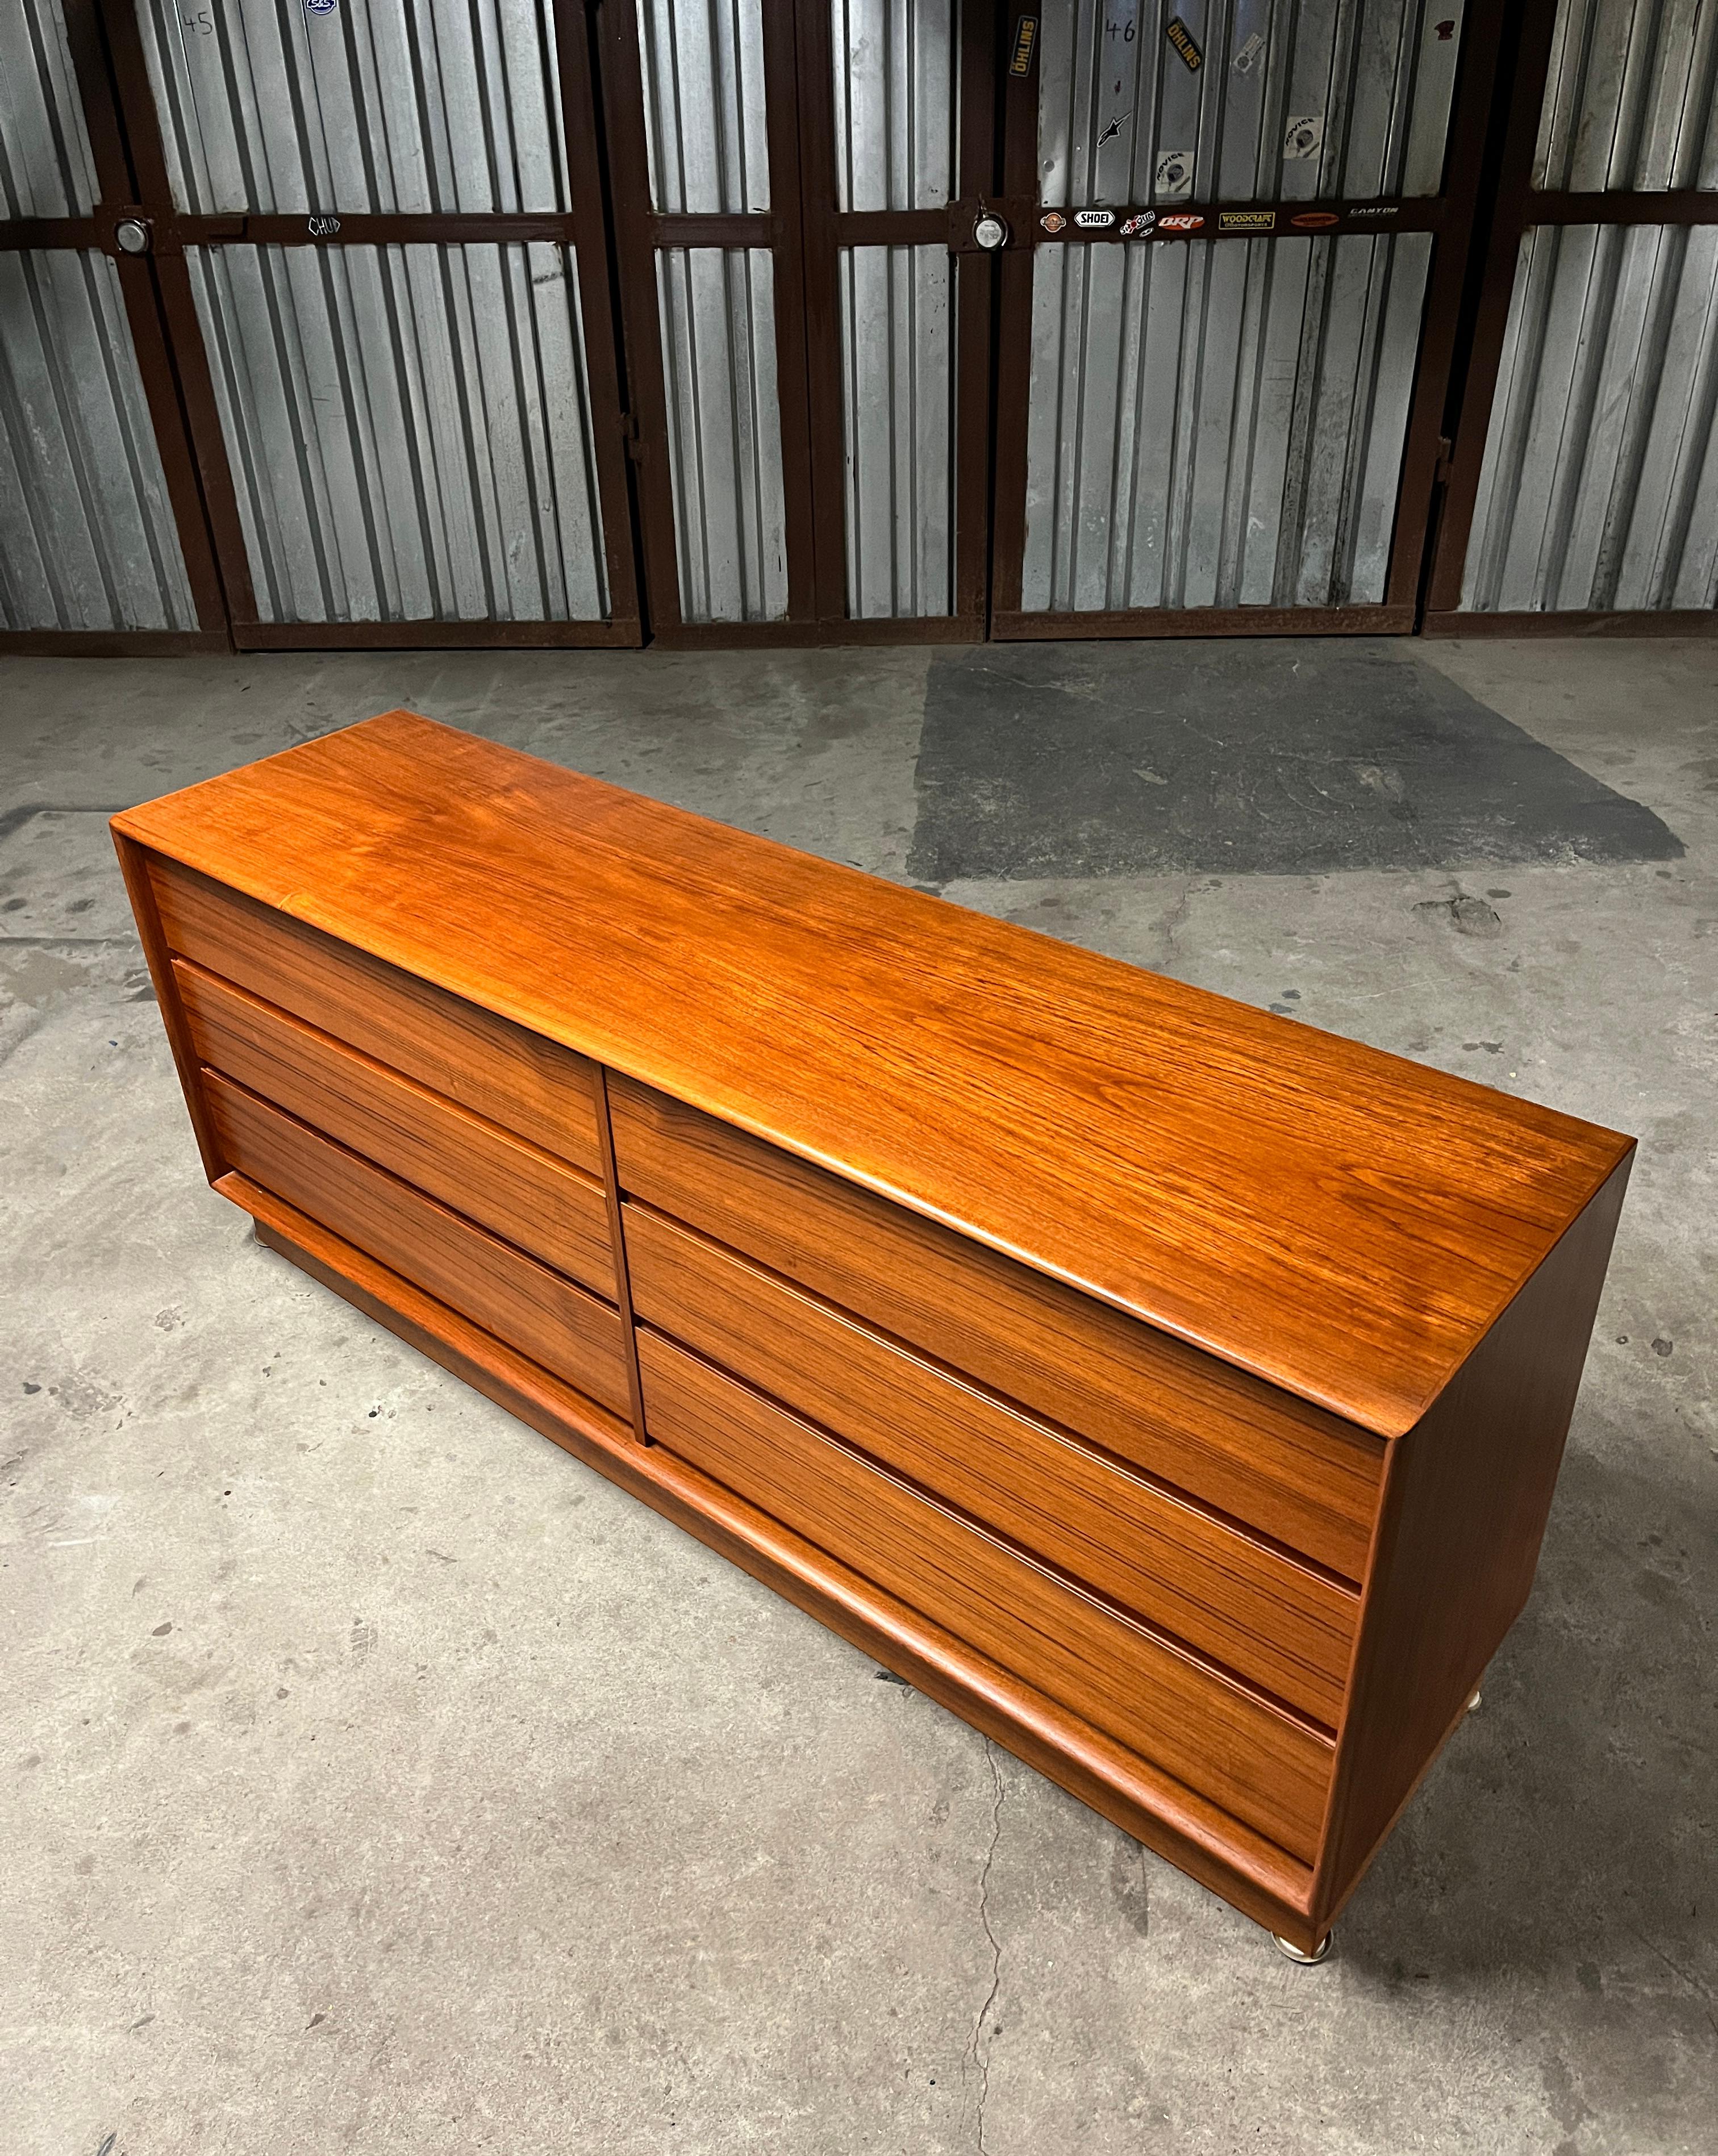 Stylish and minimalistic clean lined teak Danish Mid-Century Modern dresser by Art Furn (1960s). Outfitted with very spacious six dovetail-jointed drawers on each side of the case piece. This piece would fit perfectly in any mid-century style